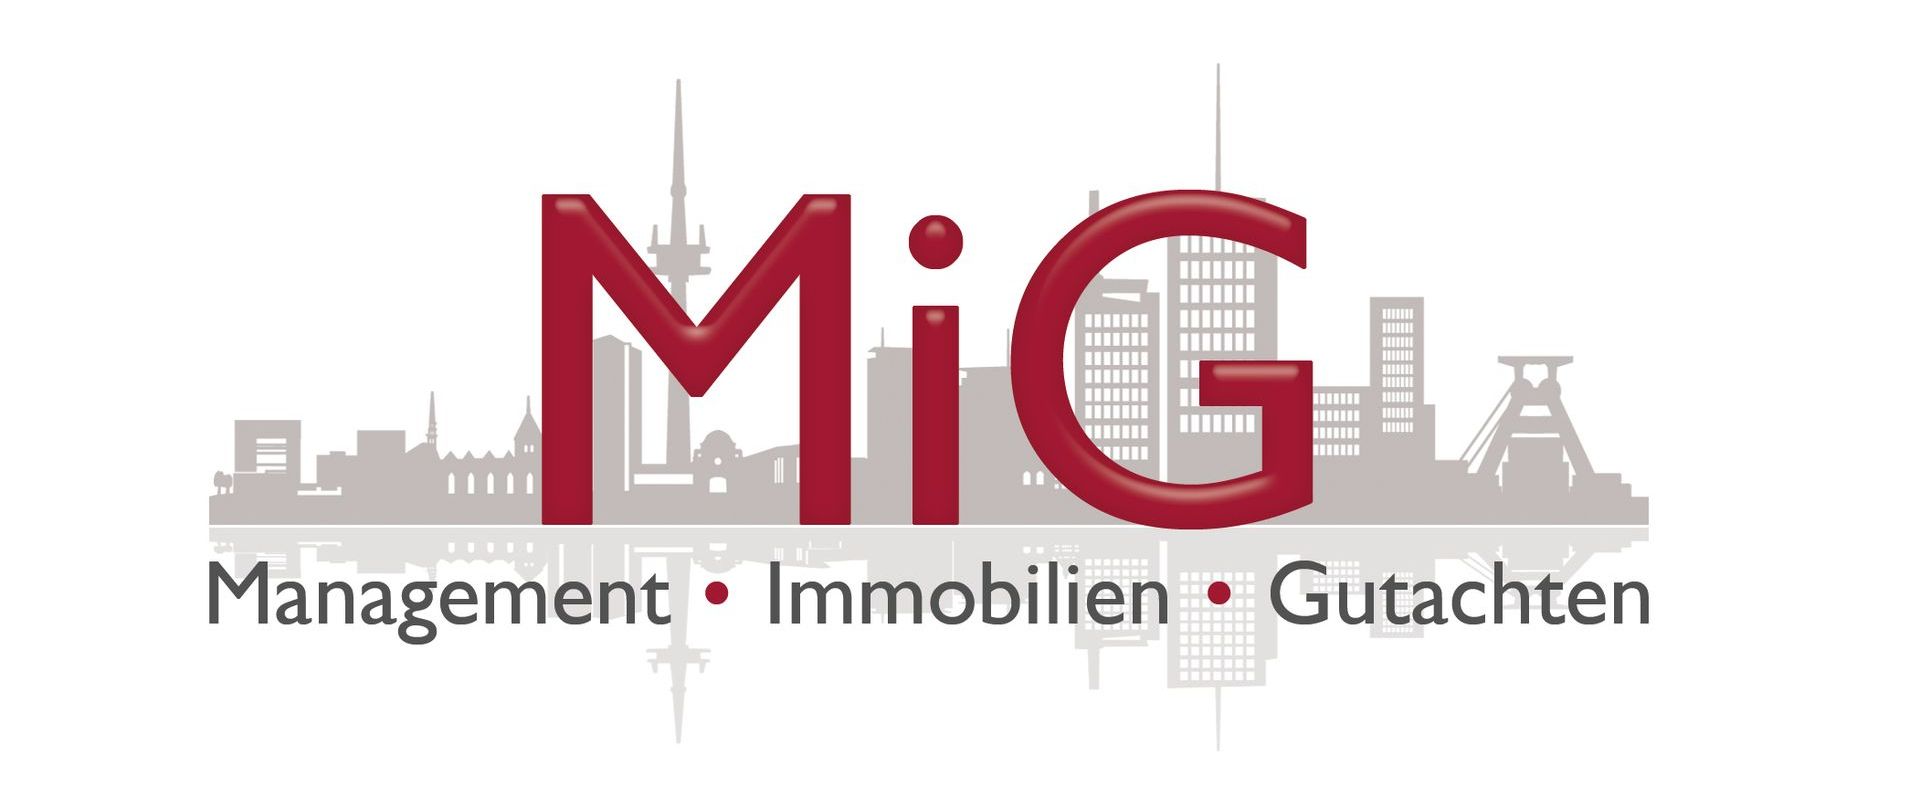 MiG Immobilien GmbH